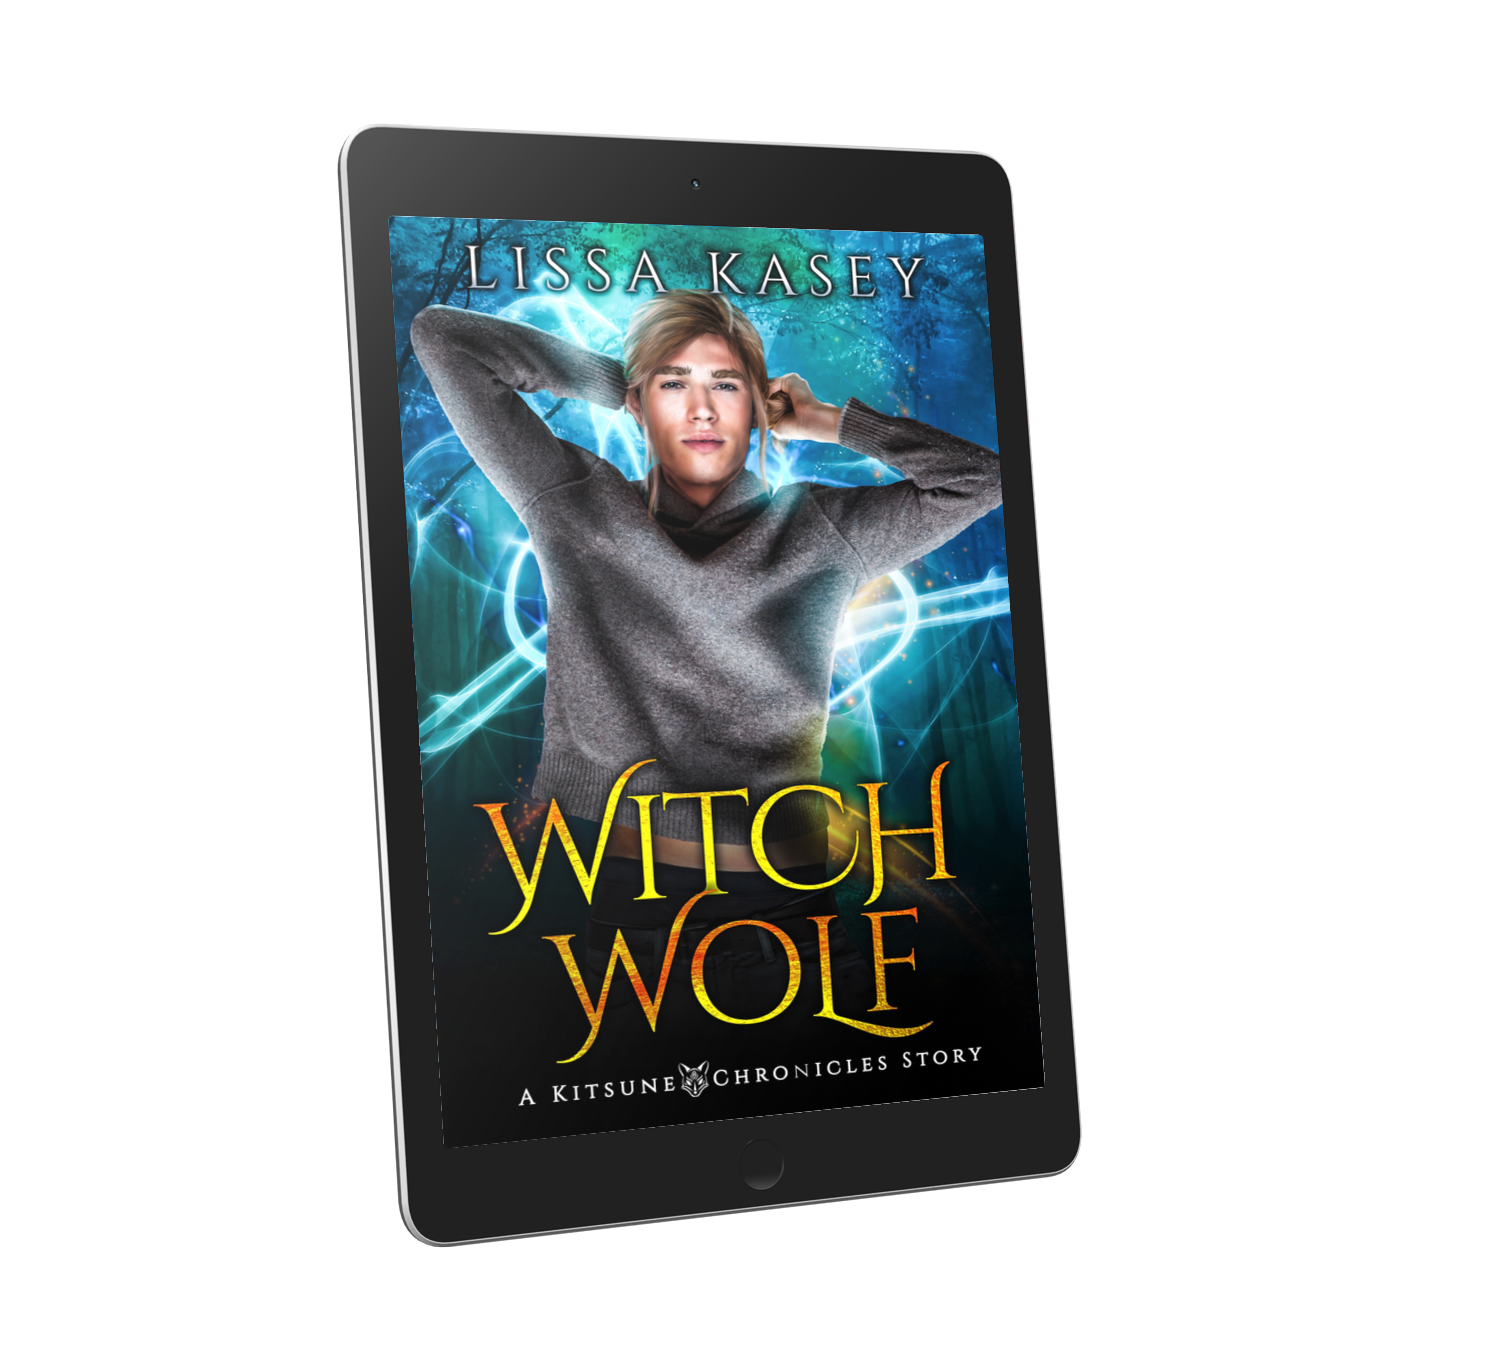 WitchWolf by Lissa Kasey a Kitsune Chronicles Story 3.5